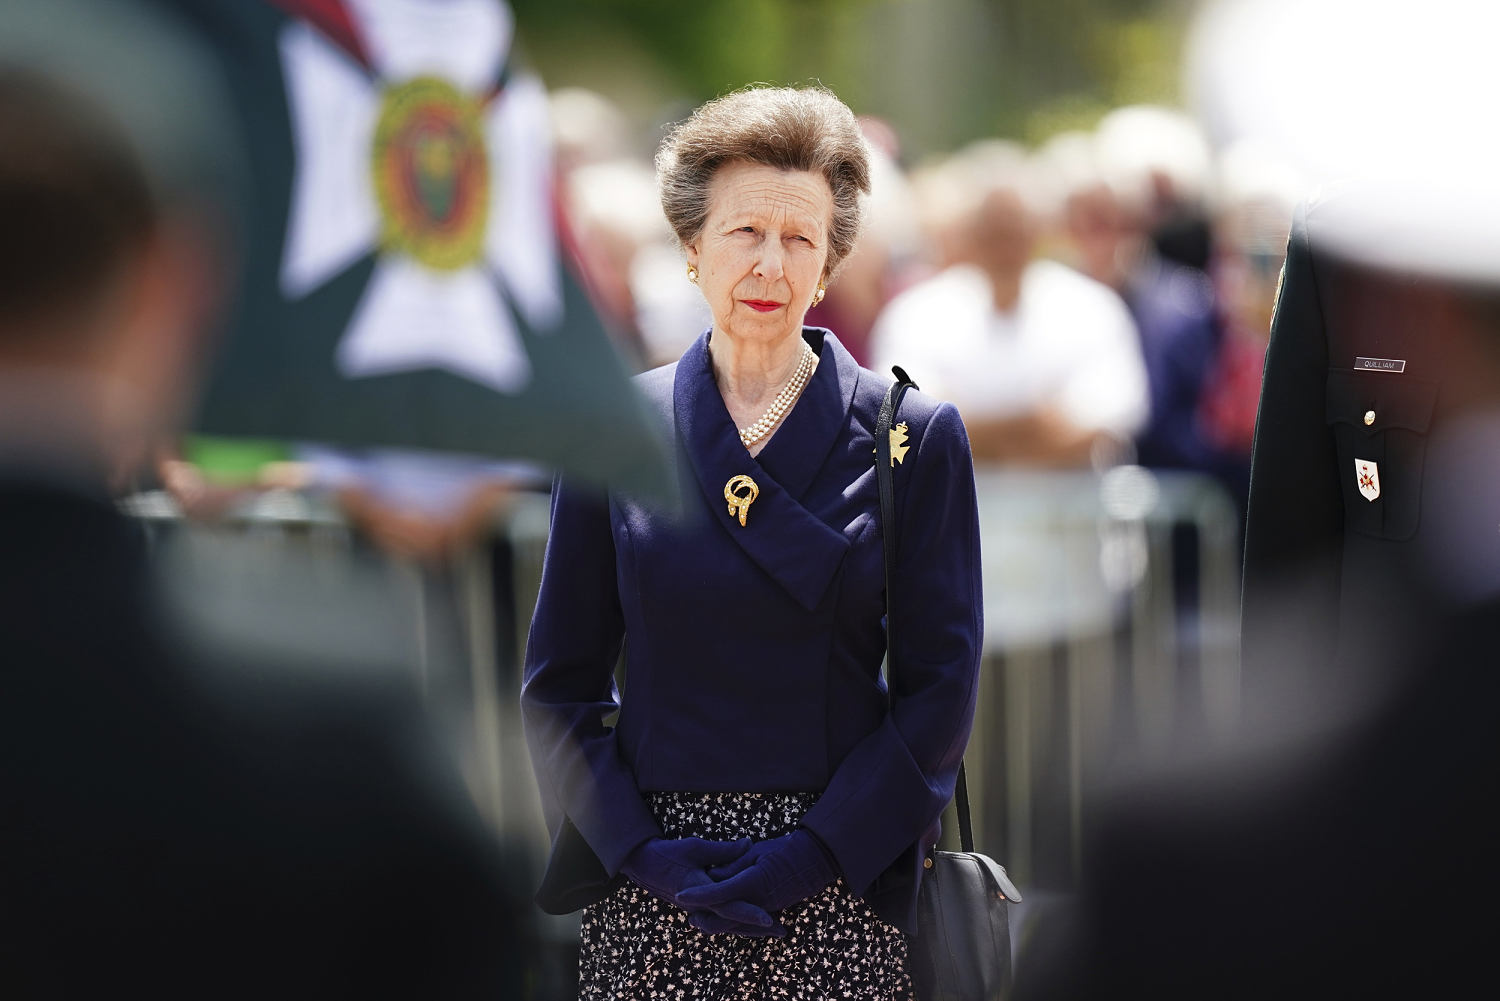 Britain's Princess Anne in the hospital with minor injuries after incident on her estate